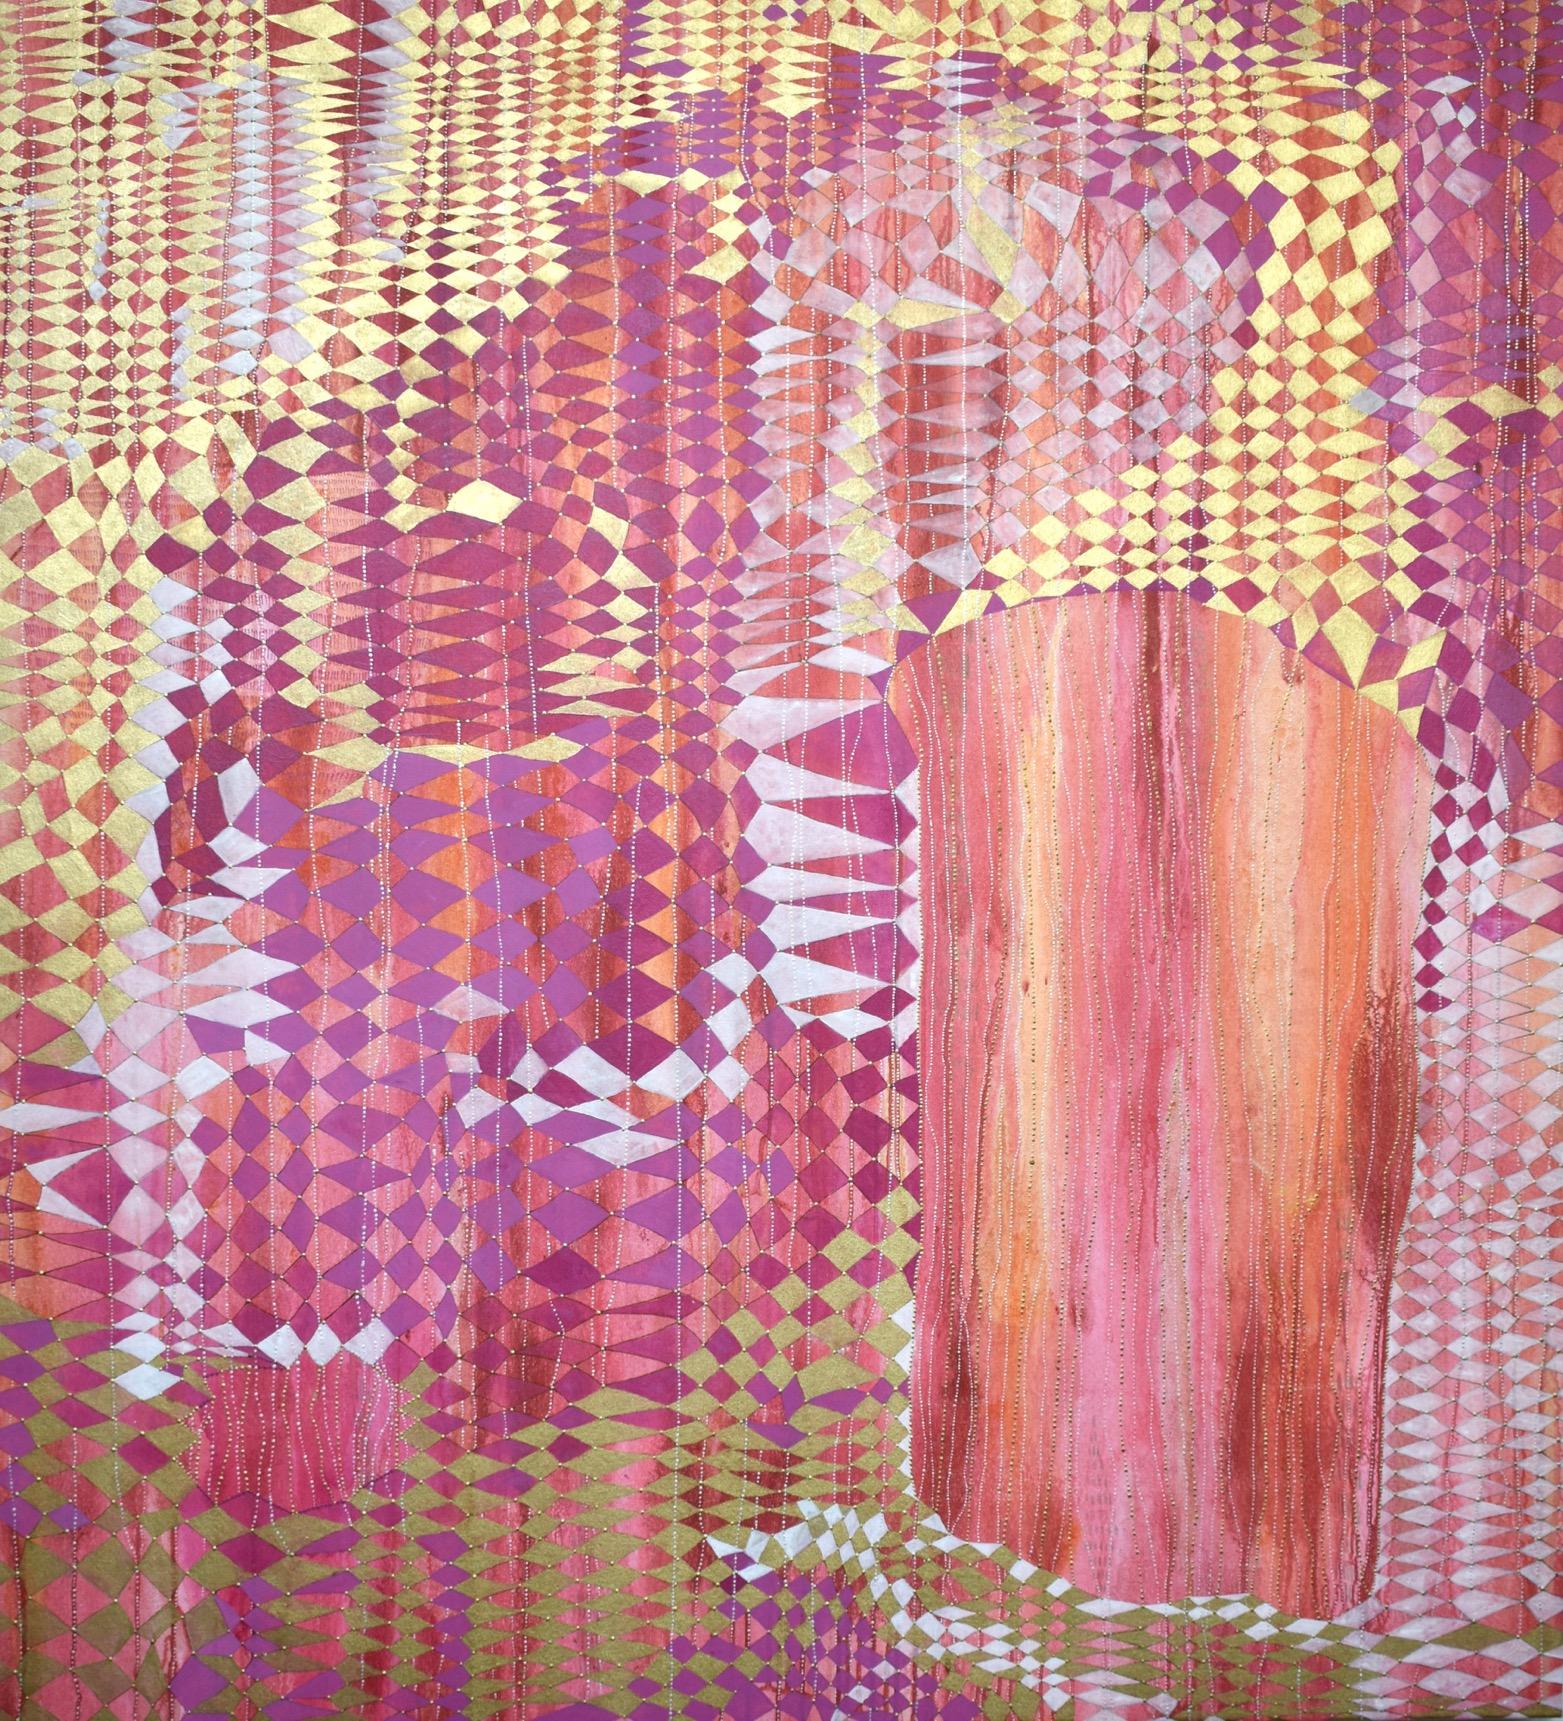 "Glimpse", abstract, acrylic painting, whimsical, pink, magenta, orange, gold